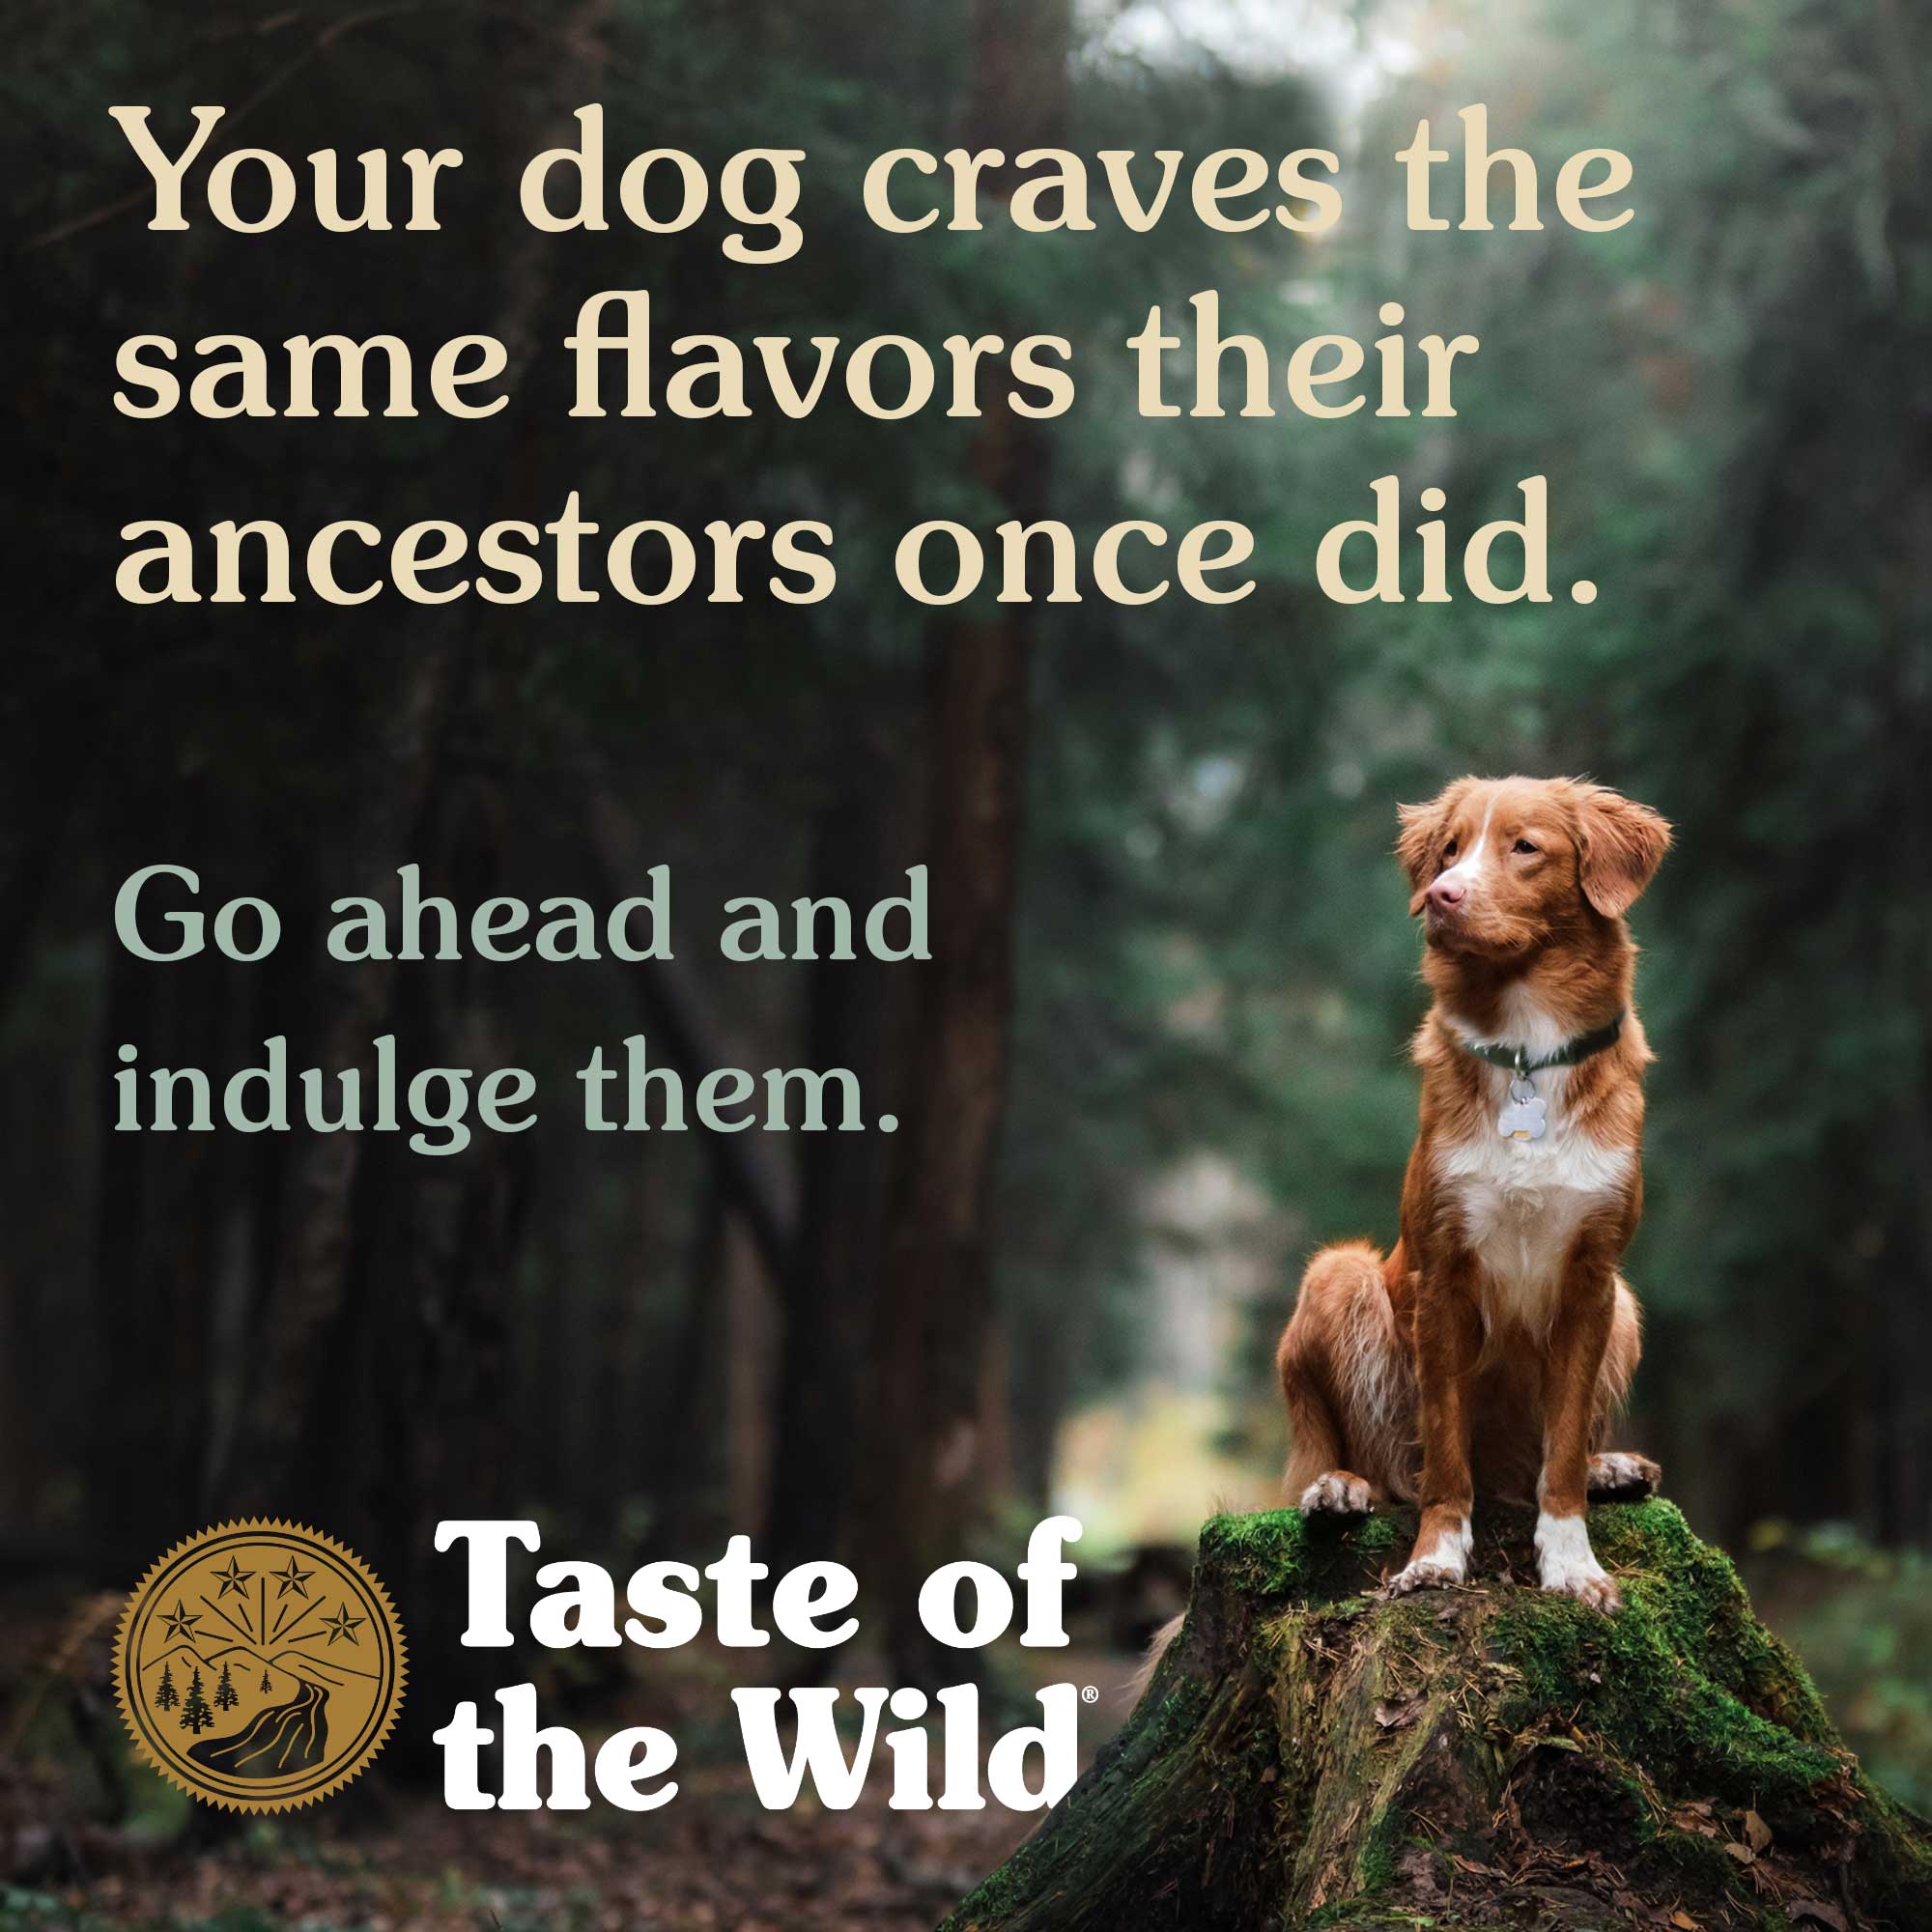 Your dog craves the same flavors their ancestors once did.